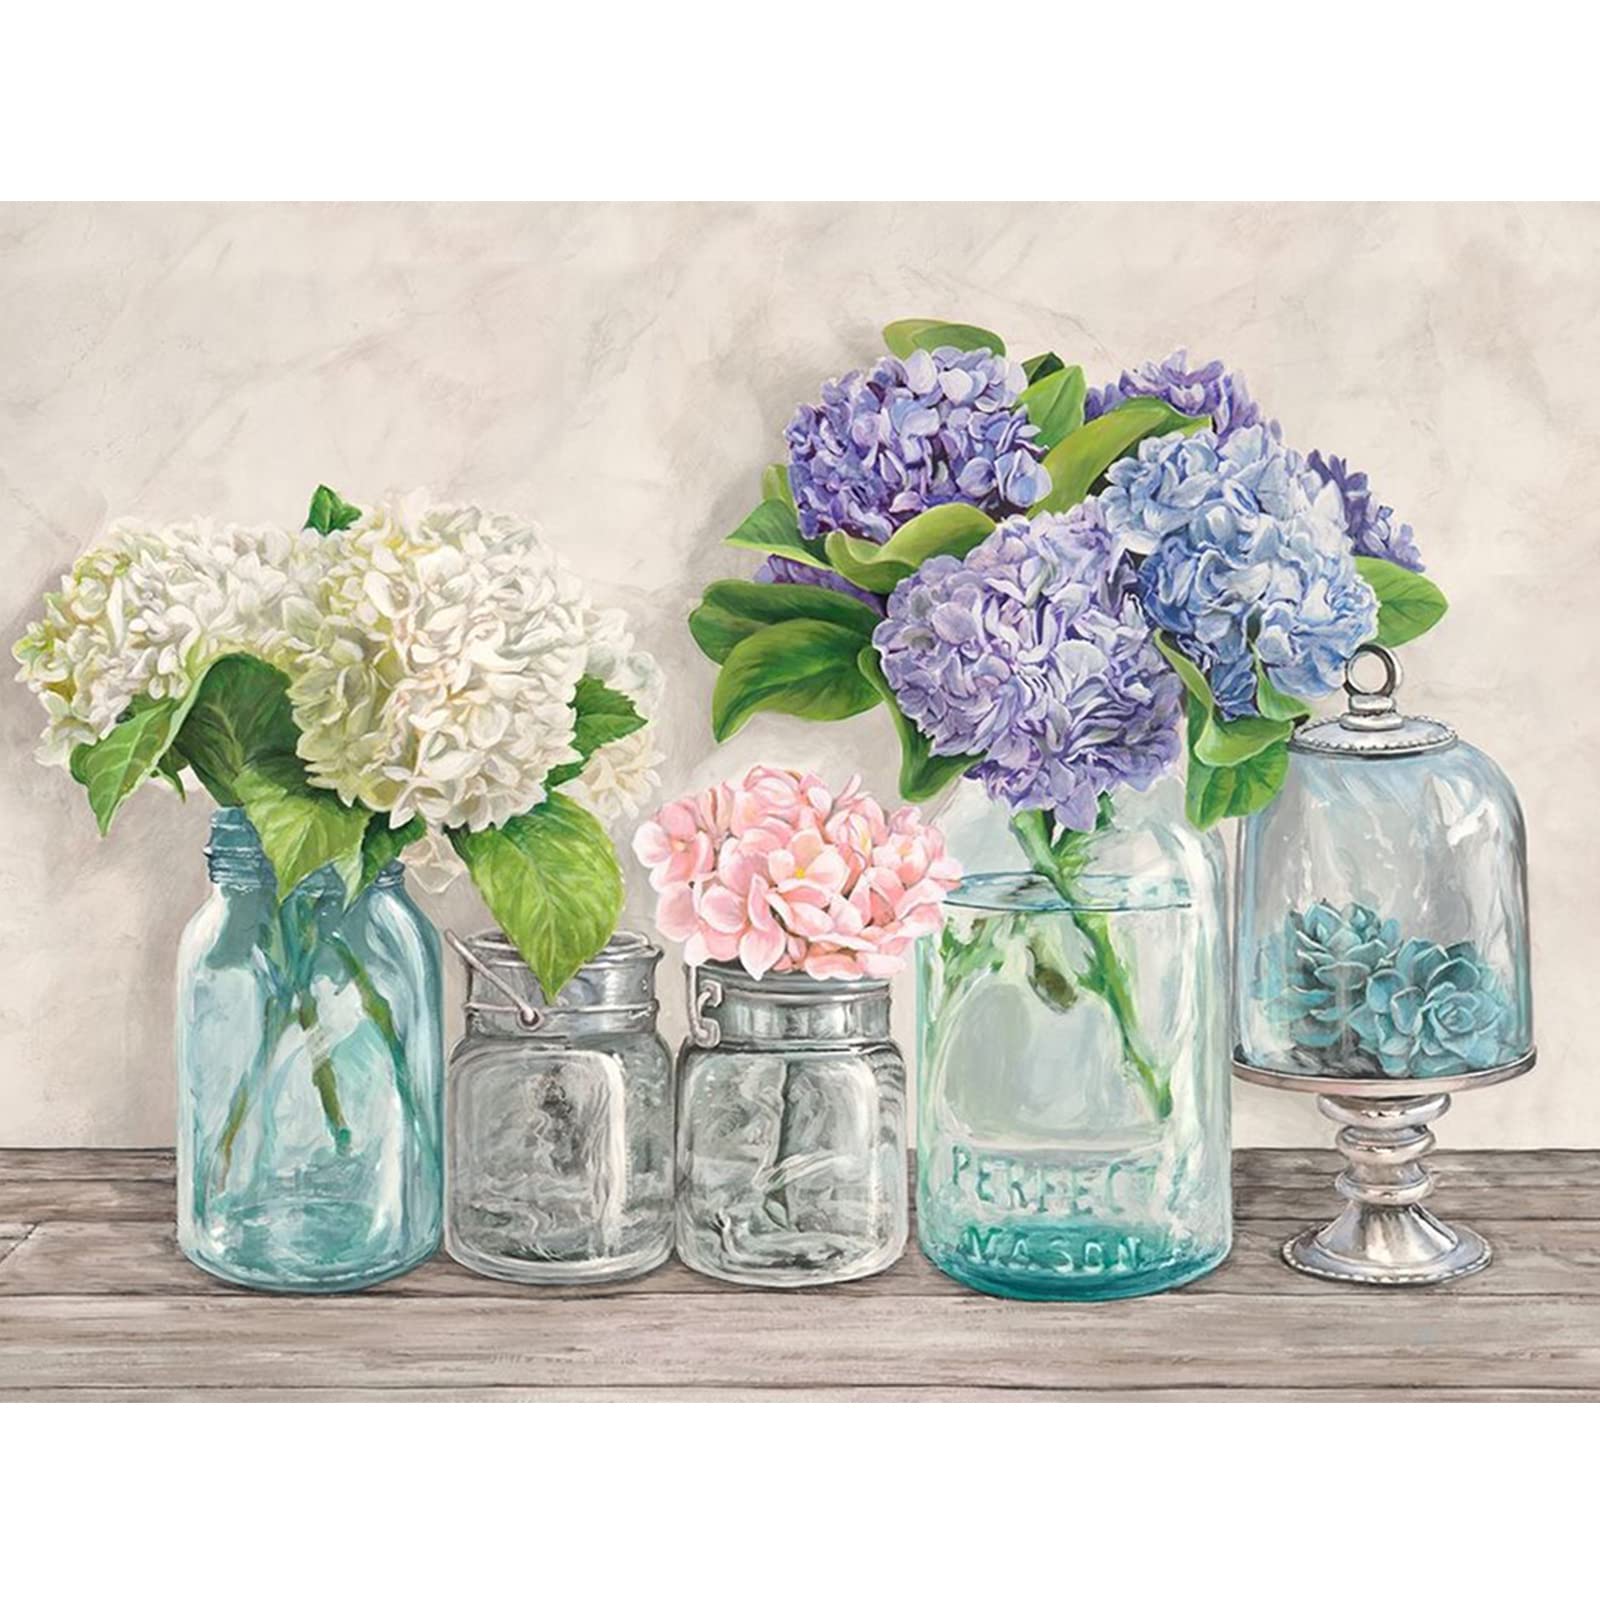 Flowers Diamond Painting Kit for Adults - DIY Home Wall Decor